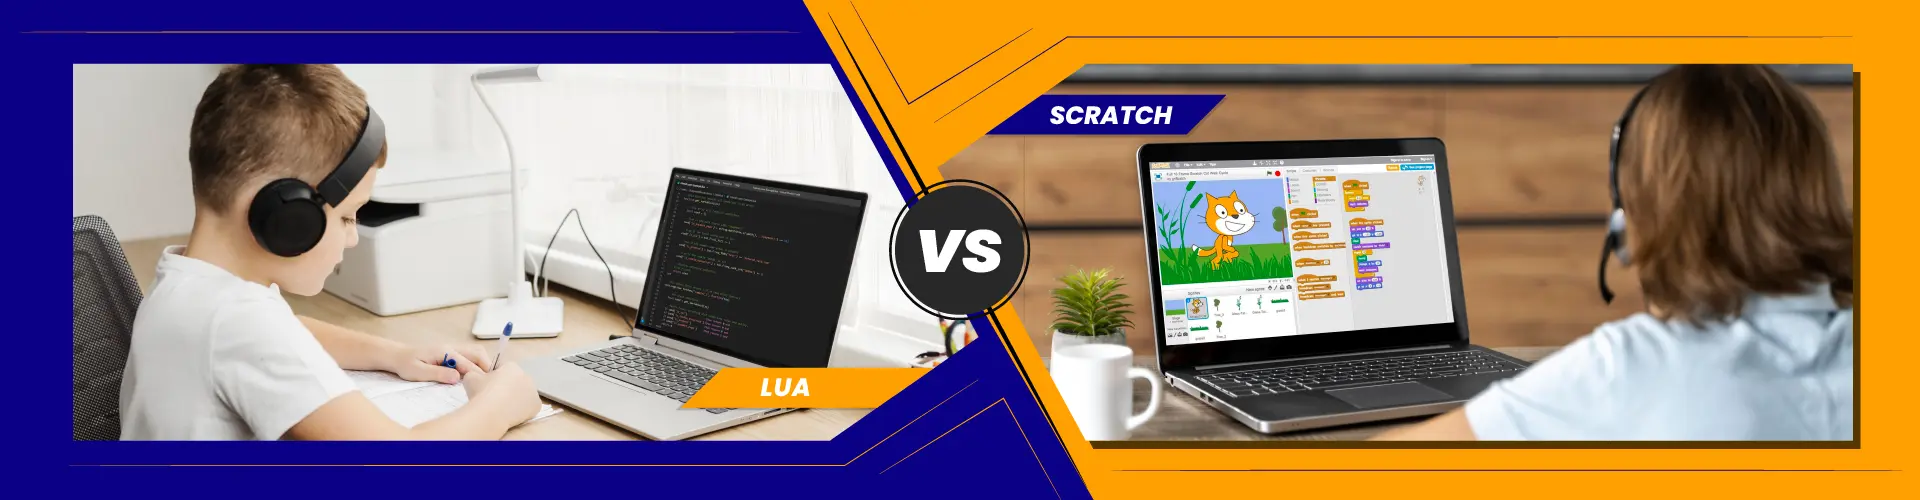 Lua Vs Scratch What are the Main Differences